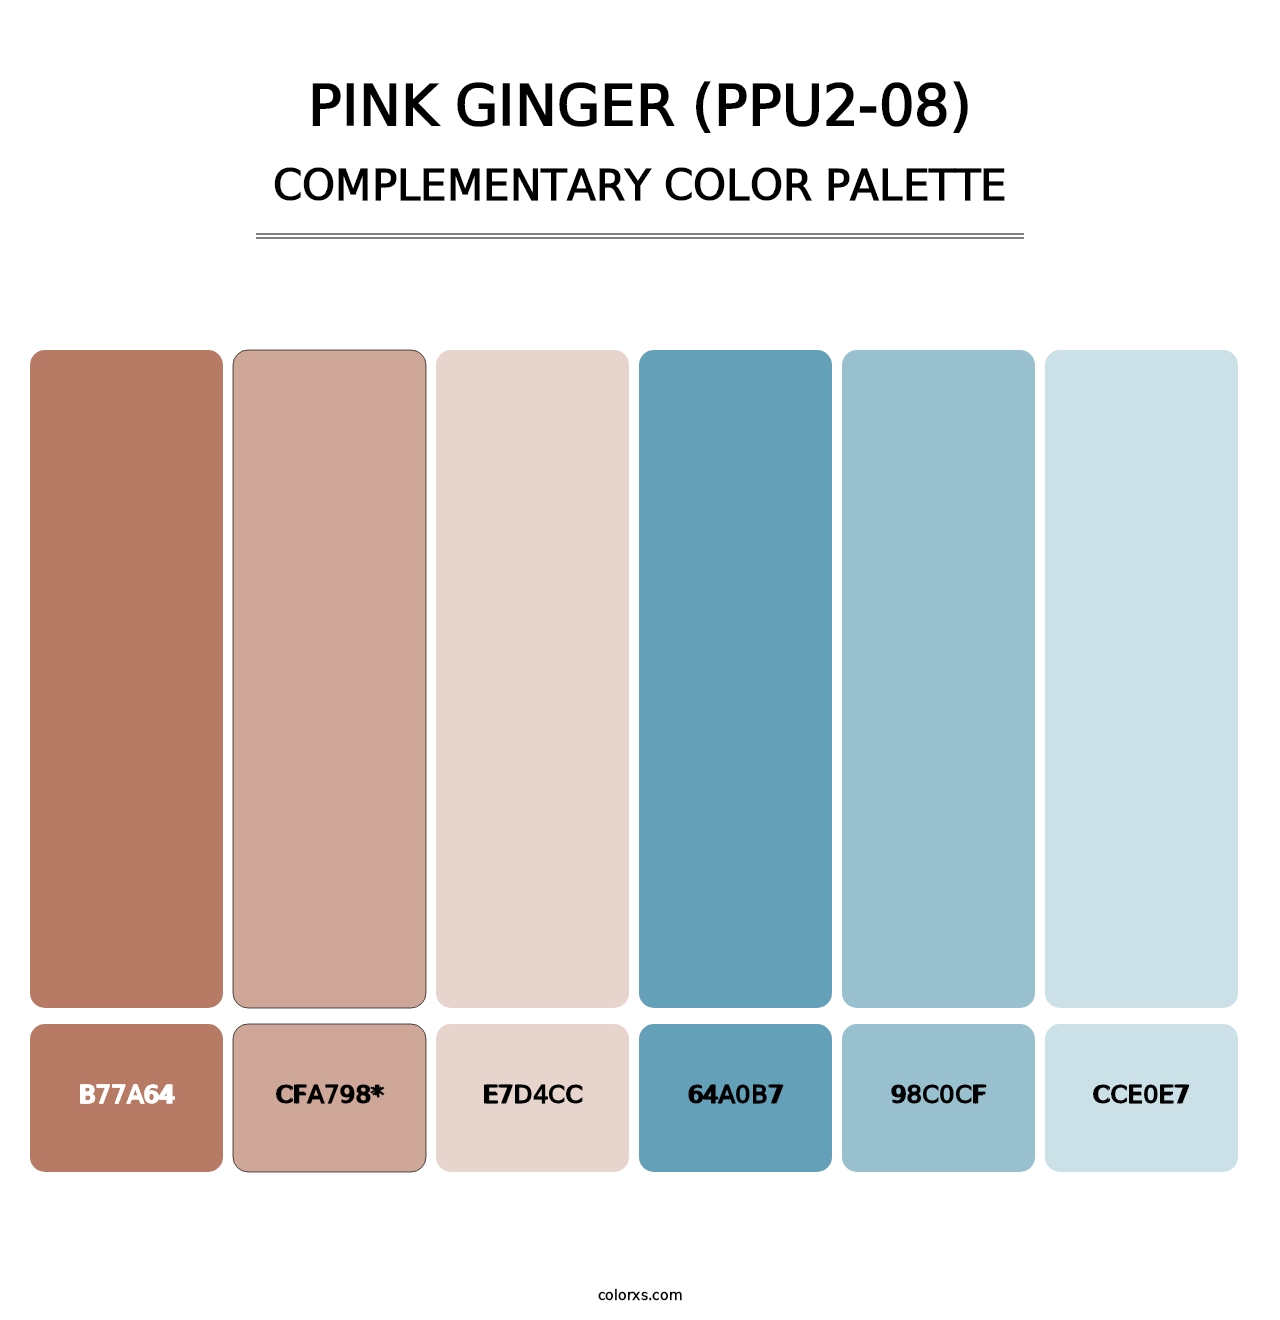 Pink Ginger (PPU2-08) - Complementary Color Palette